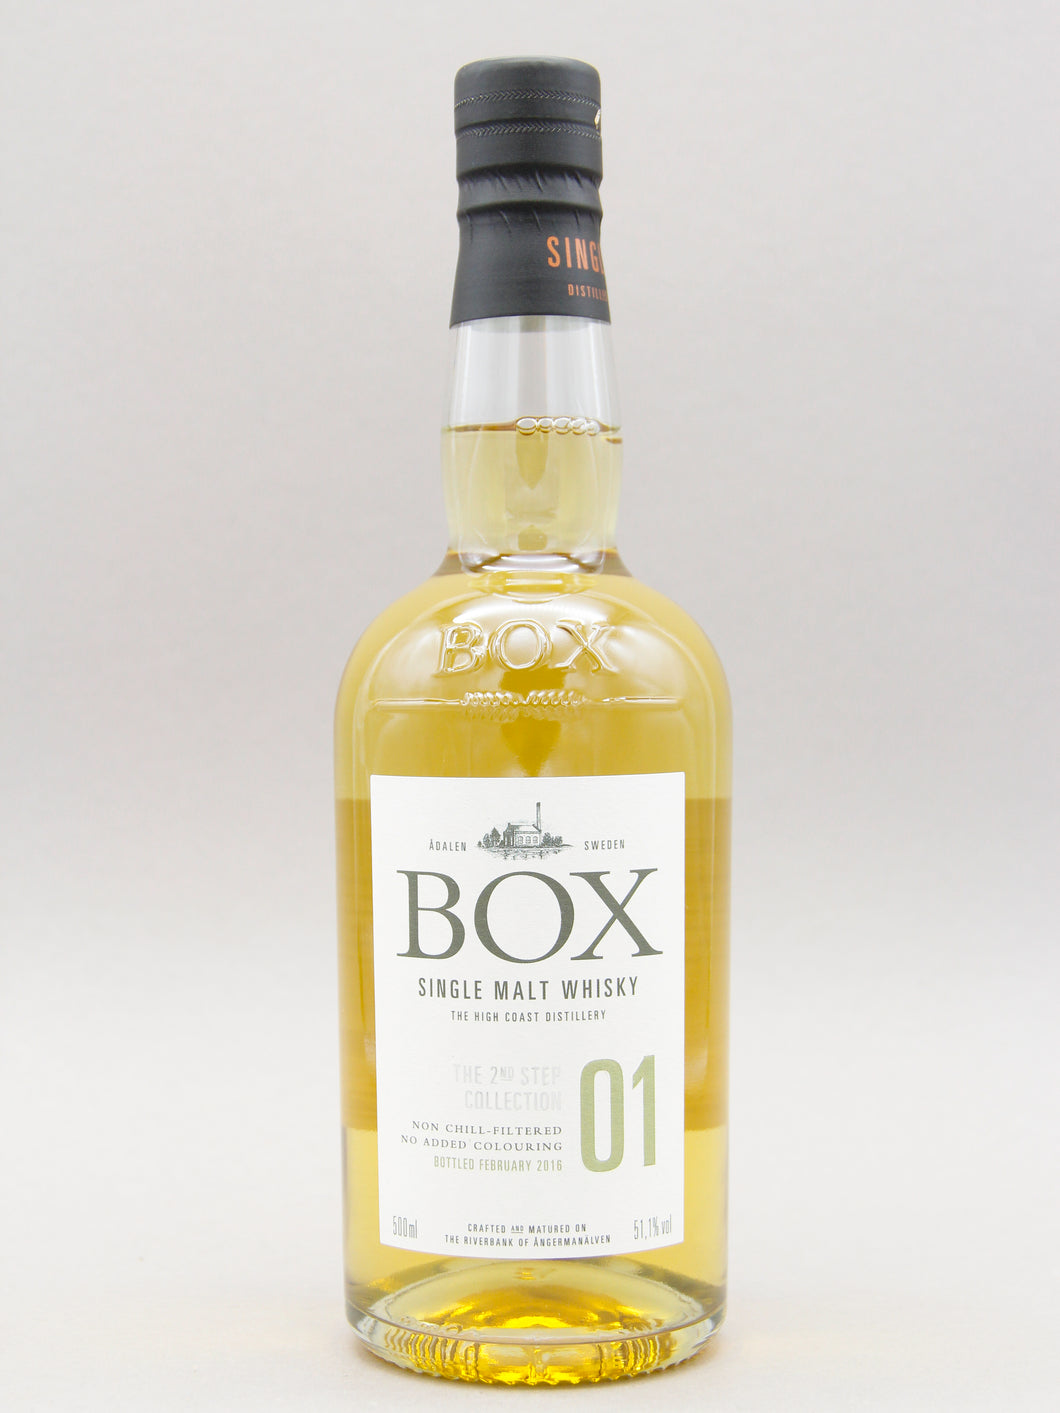 Box Second Step Collection 01, Swedish Whisky (51.1%, 50cl)